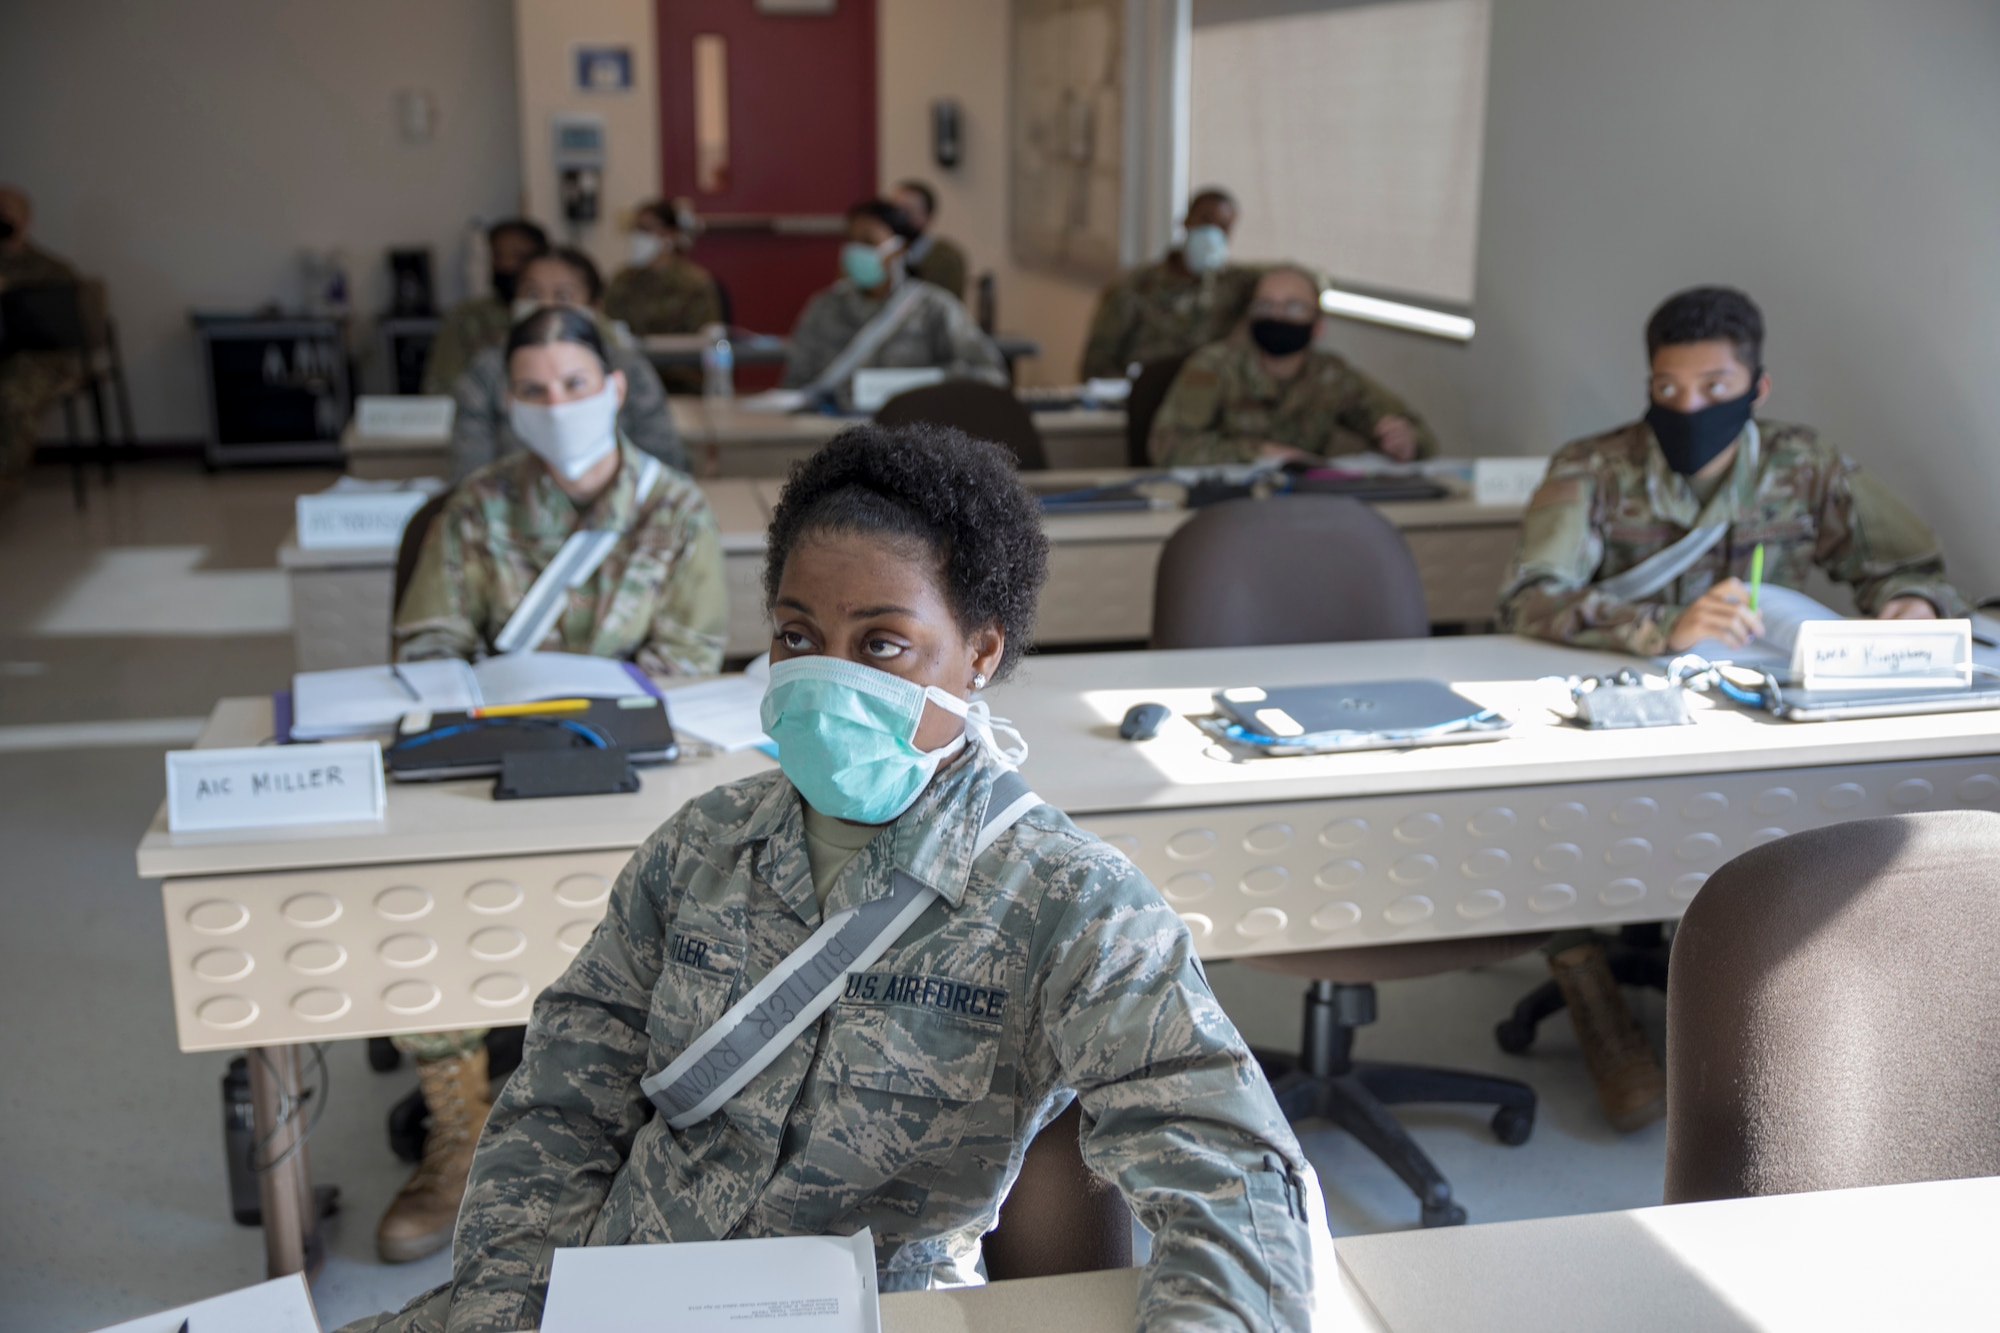 Military students in class wearing masks.